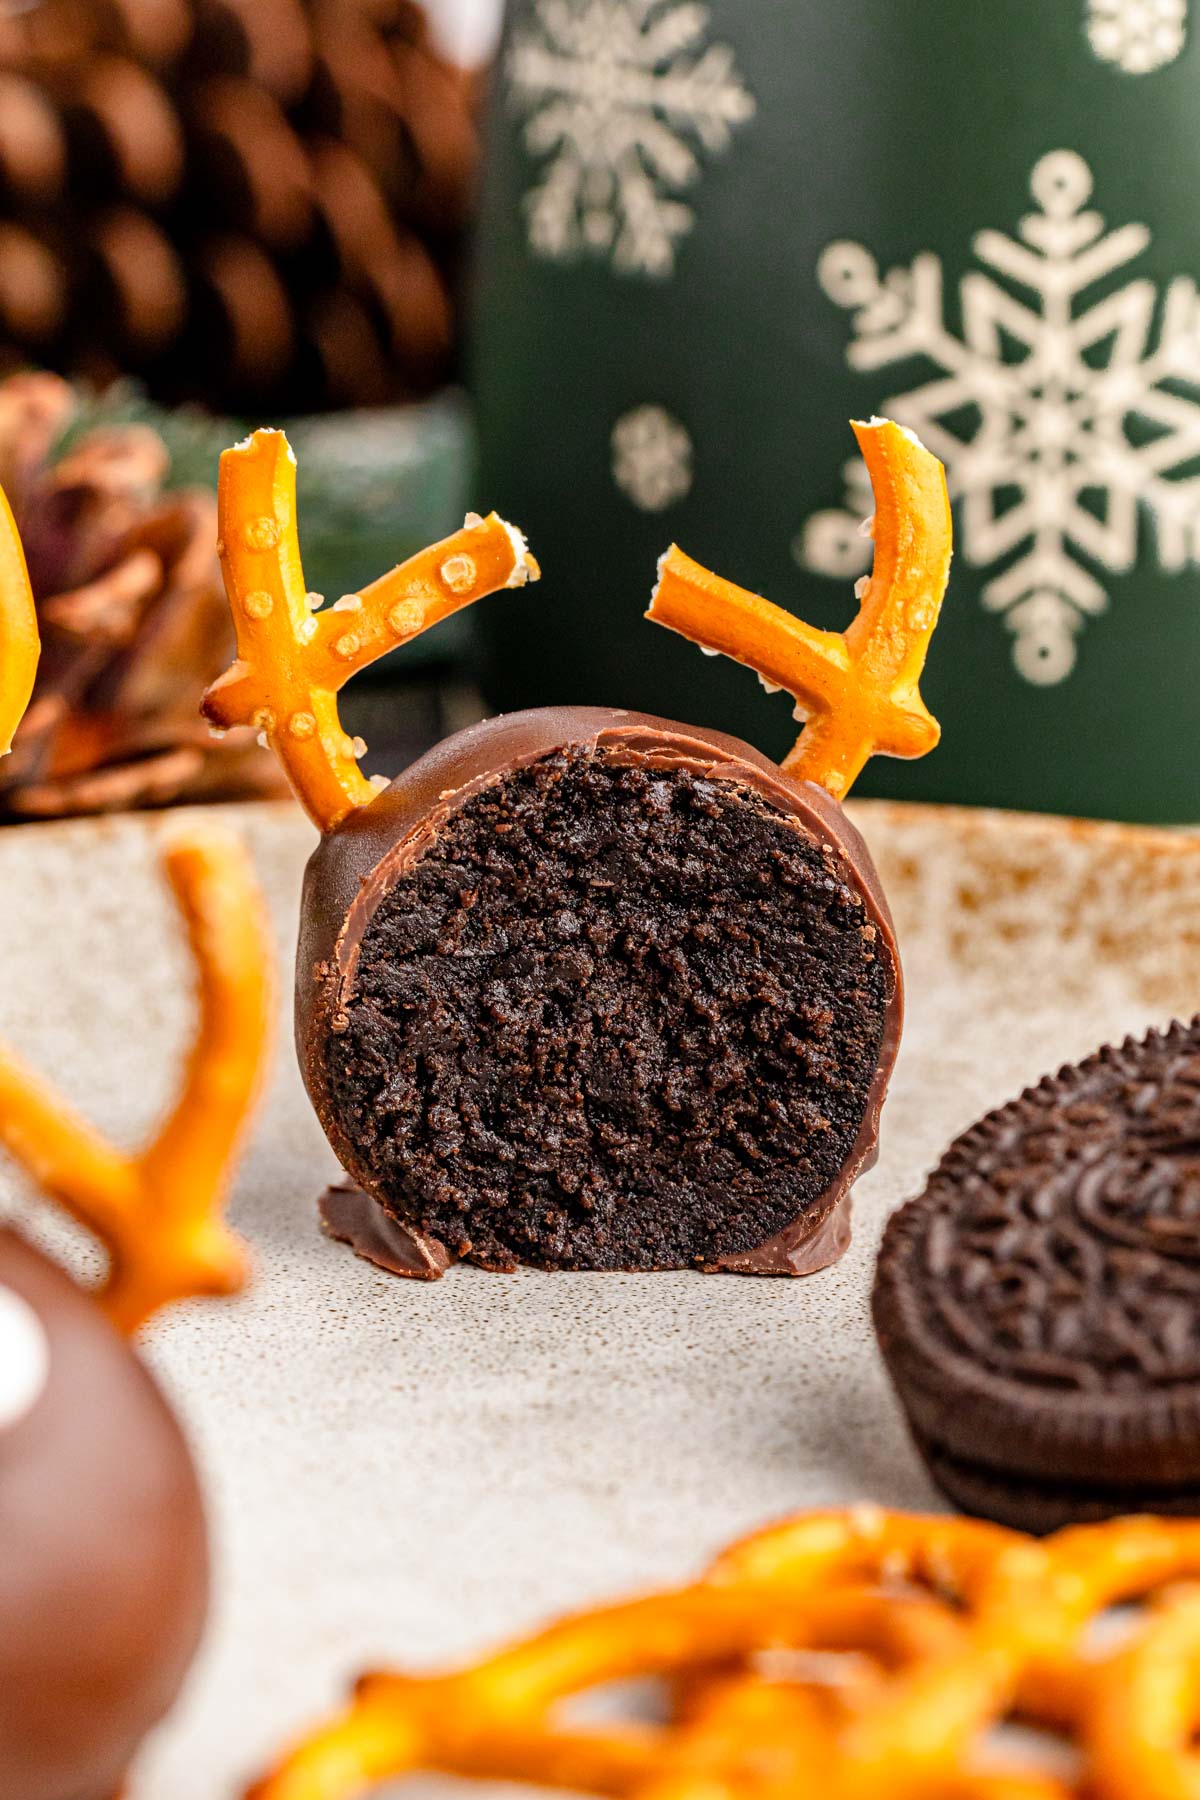 A reindeer Oreo ball that's been cut in half to show the filling.